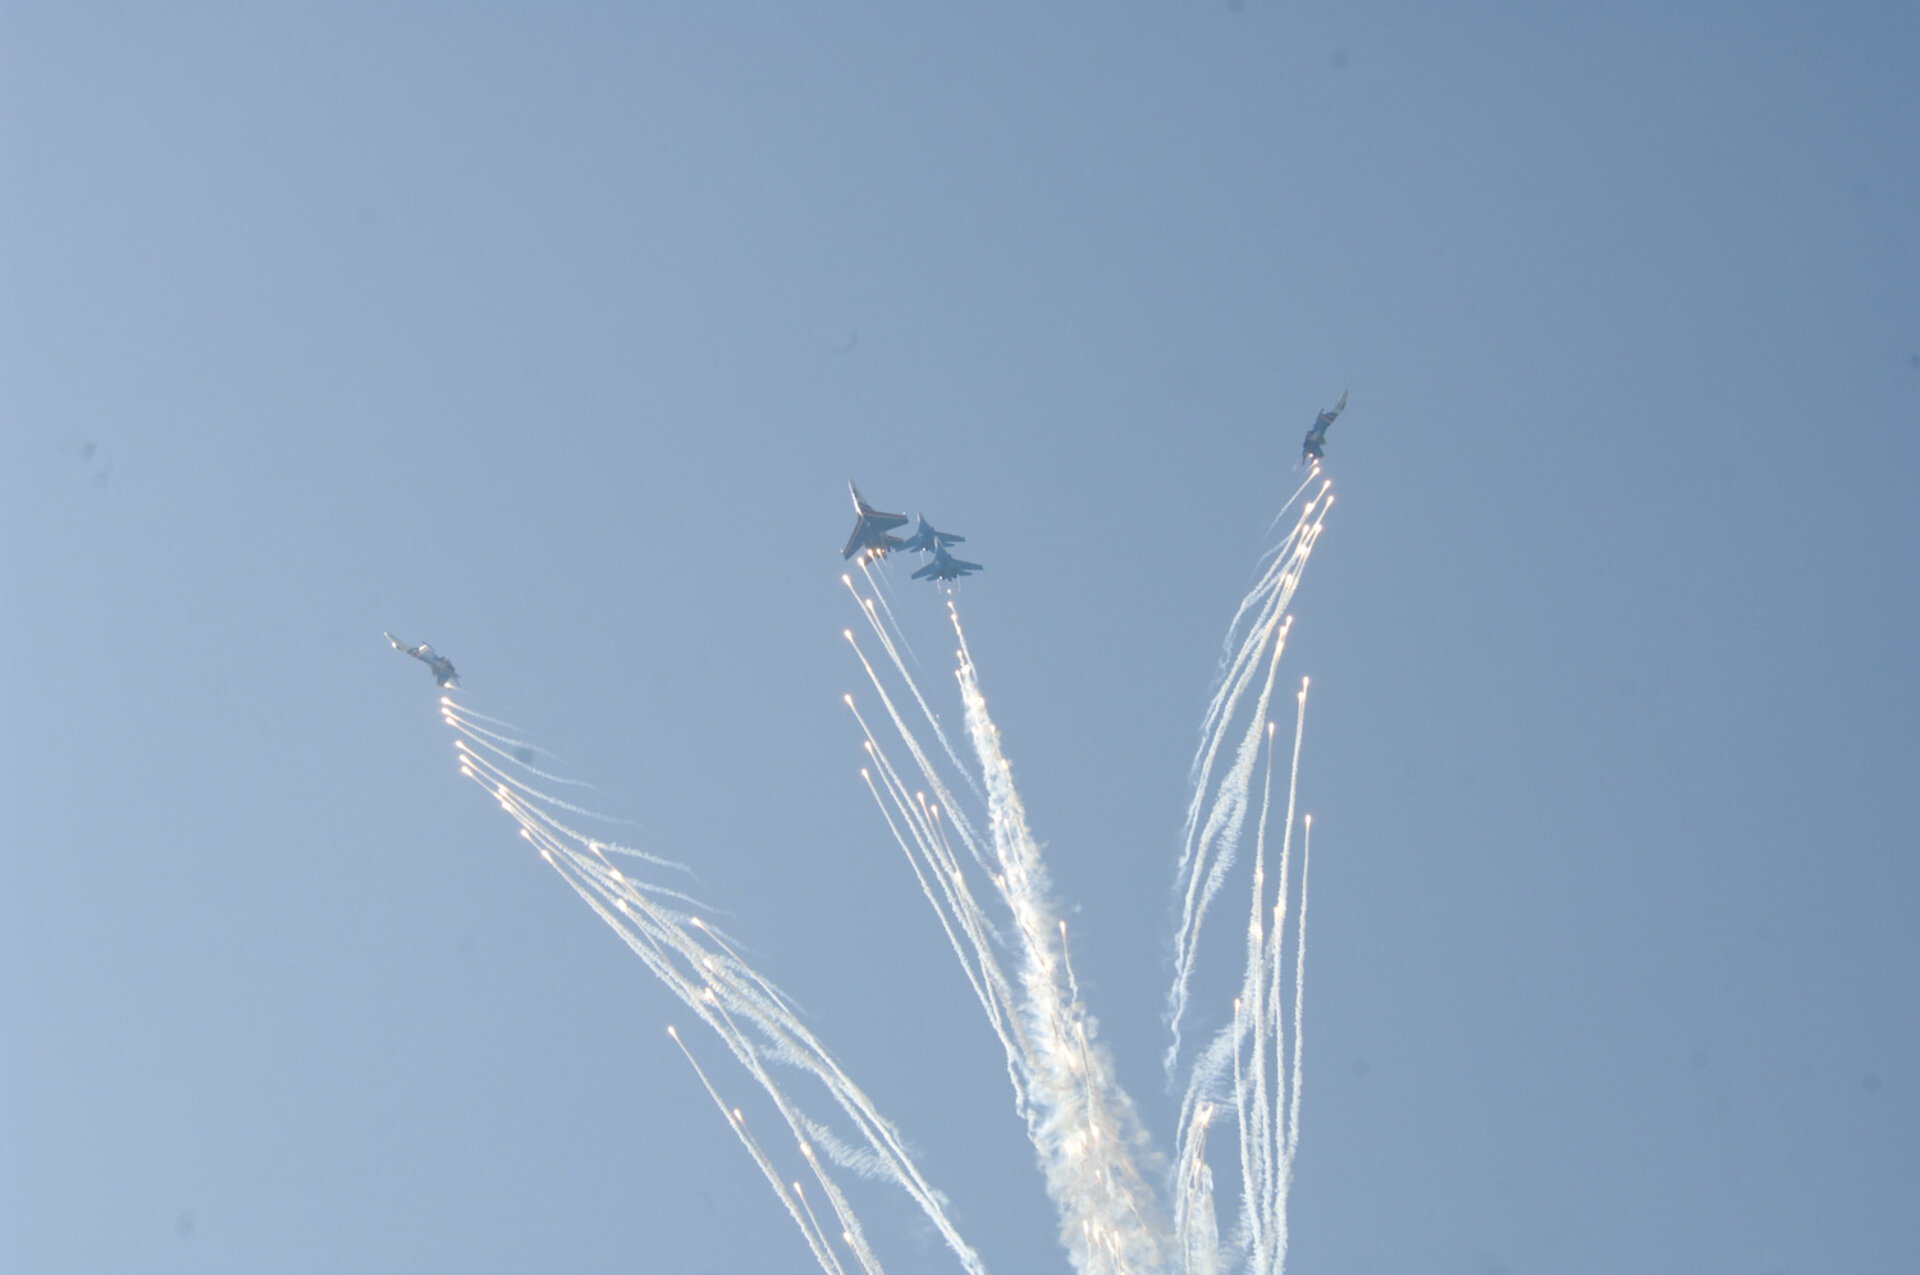 Impressive flying displays during the air show at MAKS 2007